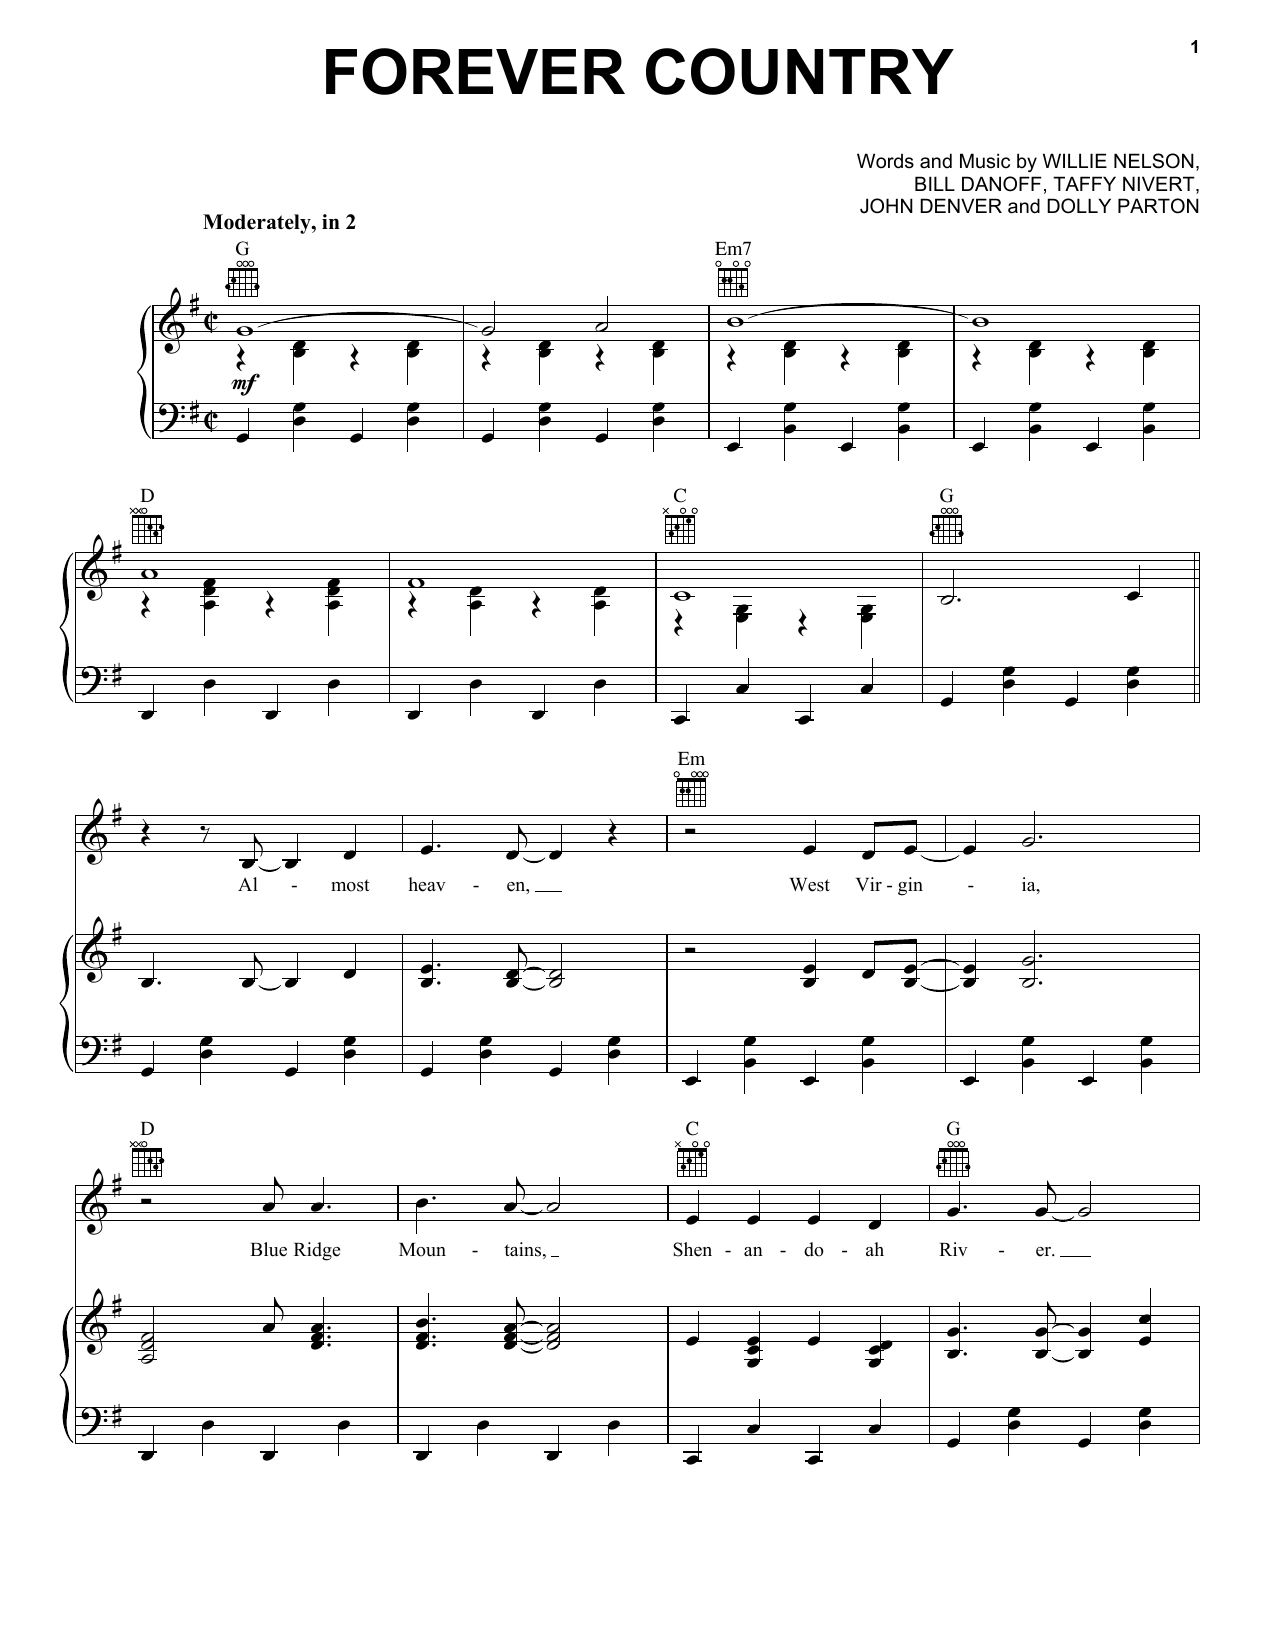 Download Artists of Then, Now & Forever Forever Country Sheet Music